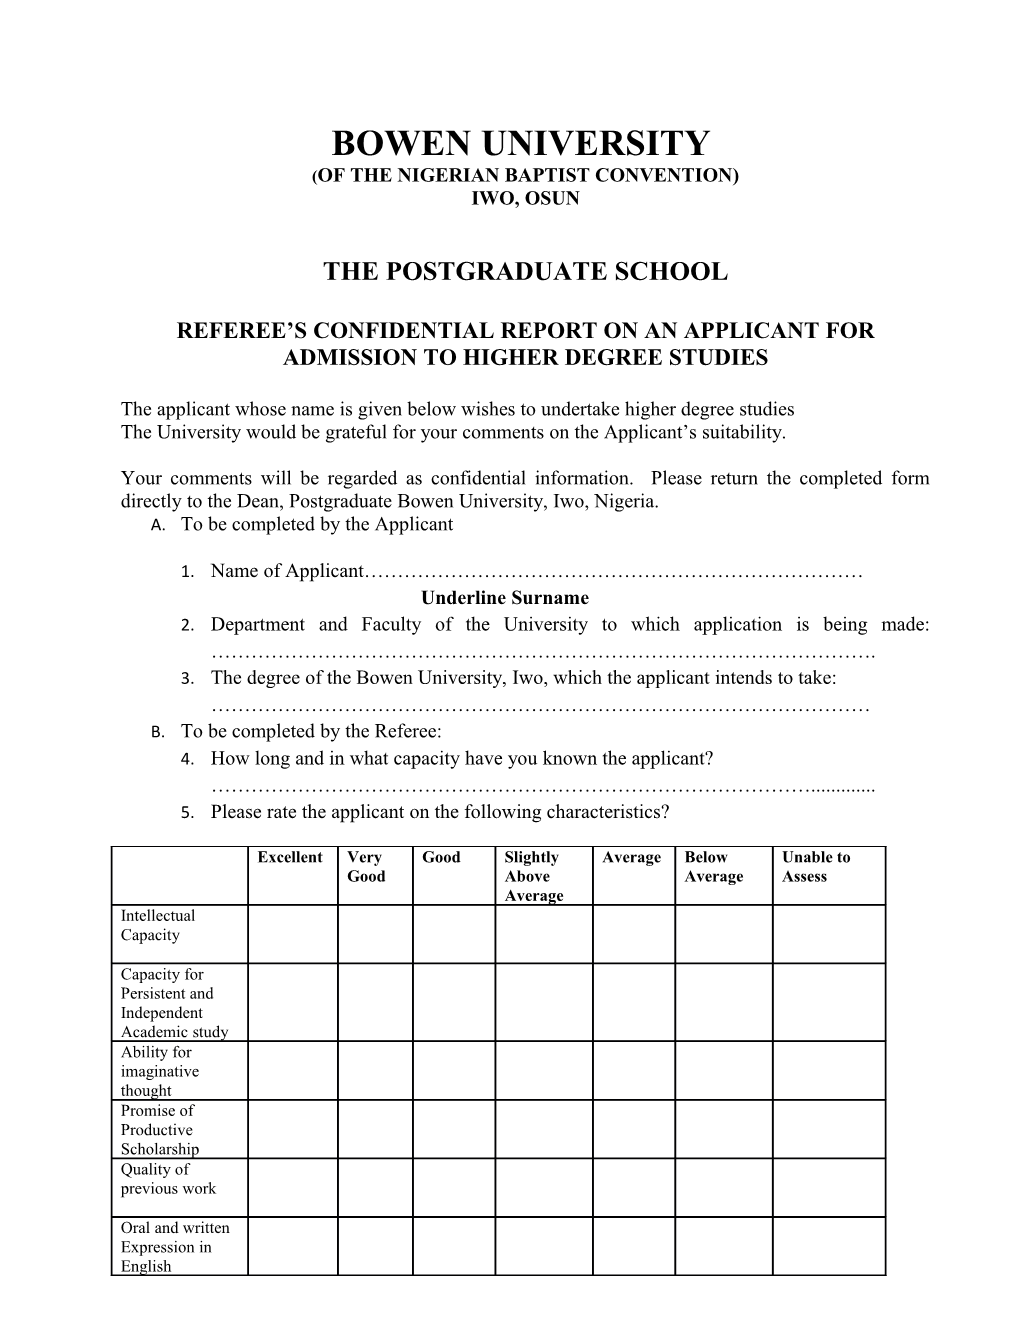 Referee S Confidential Report on an Applicant for Admission to Higher Degree Studies